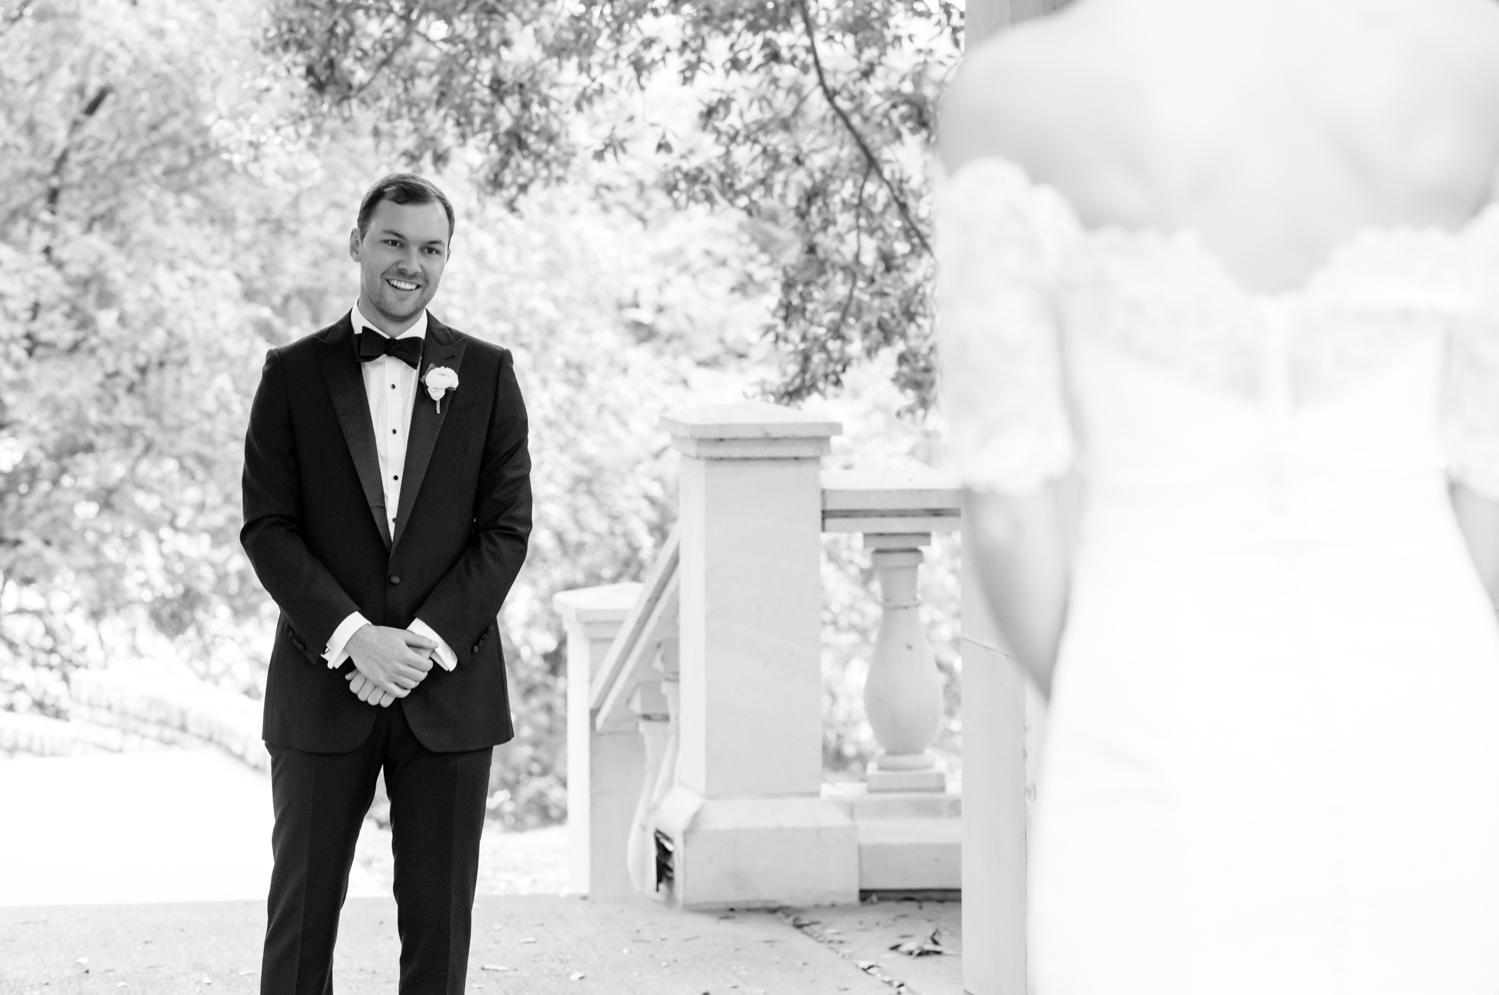 The groom smiles as he sees his bride for the first time